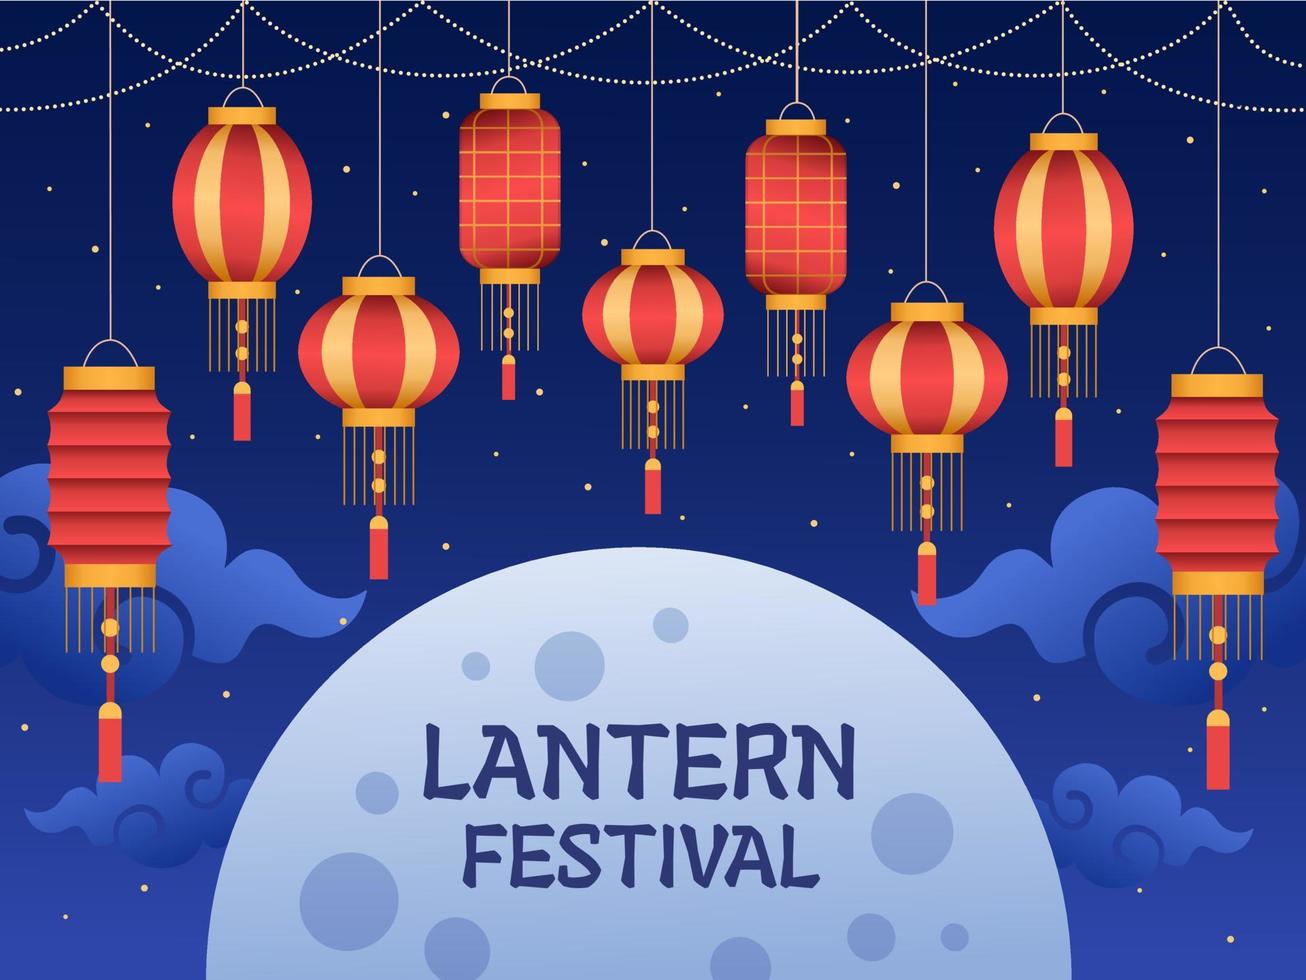 Hanging Chinese Lantern with Red and Yellow Color at Night Sky. Chinese Lantern Festival Design. Chinese New year. Can be used for greeting card, invitation, poster, banner, web, animation, etc. vector